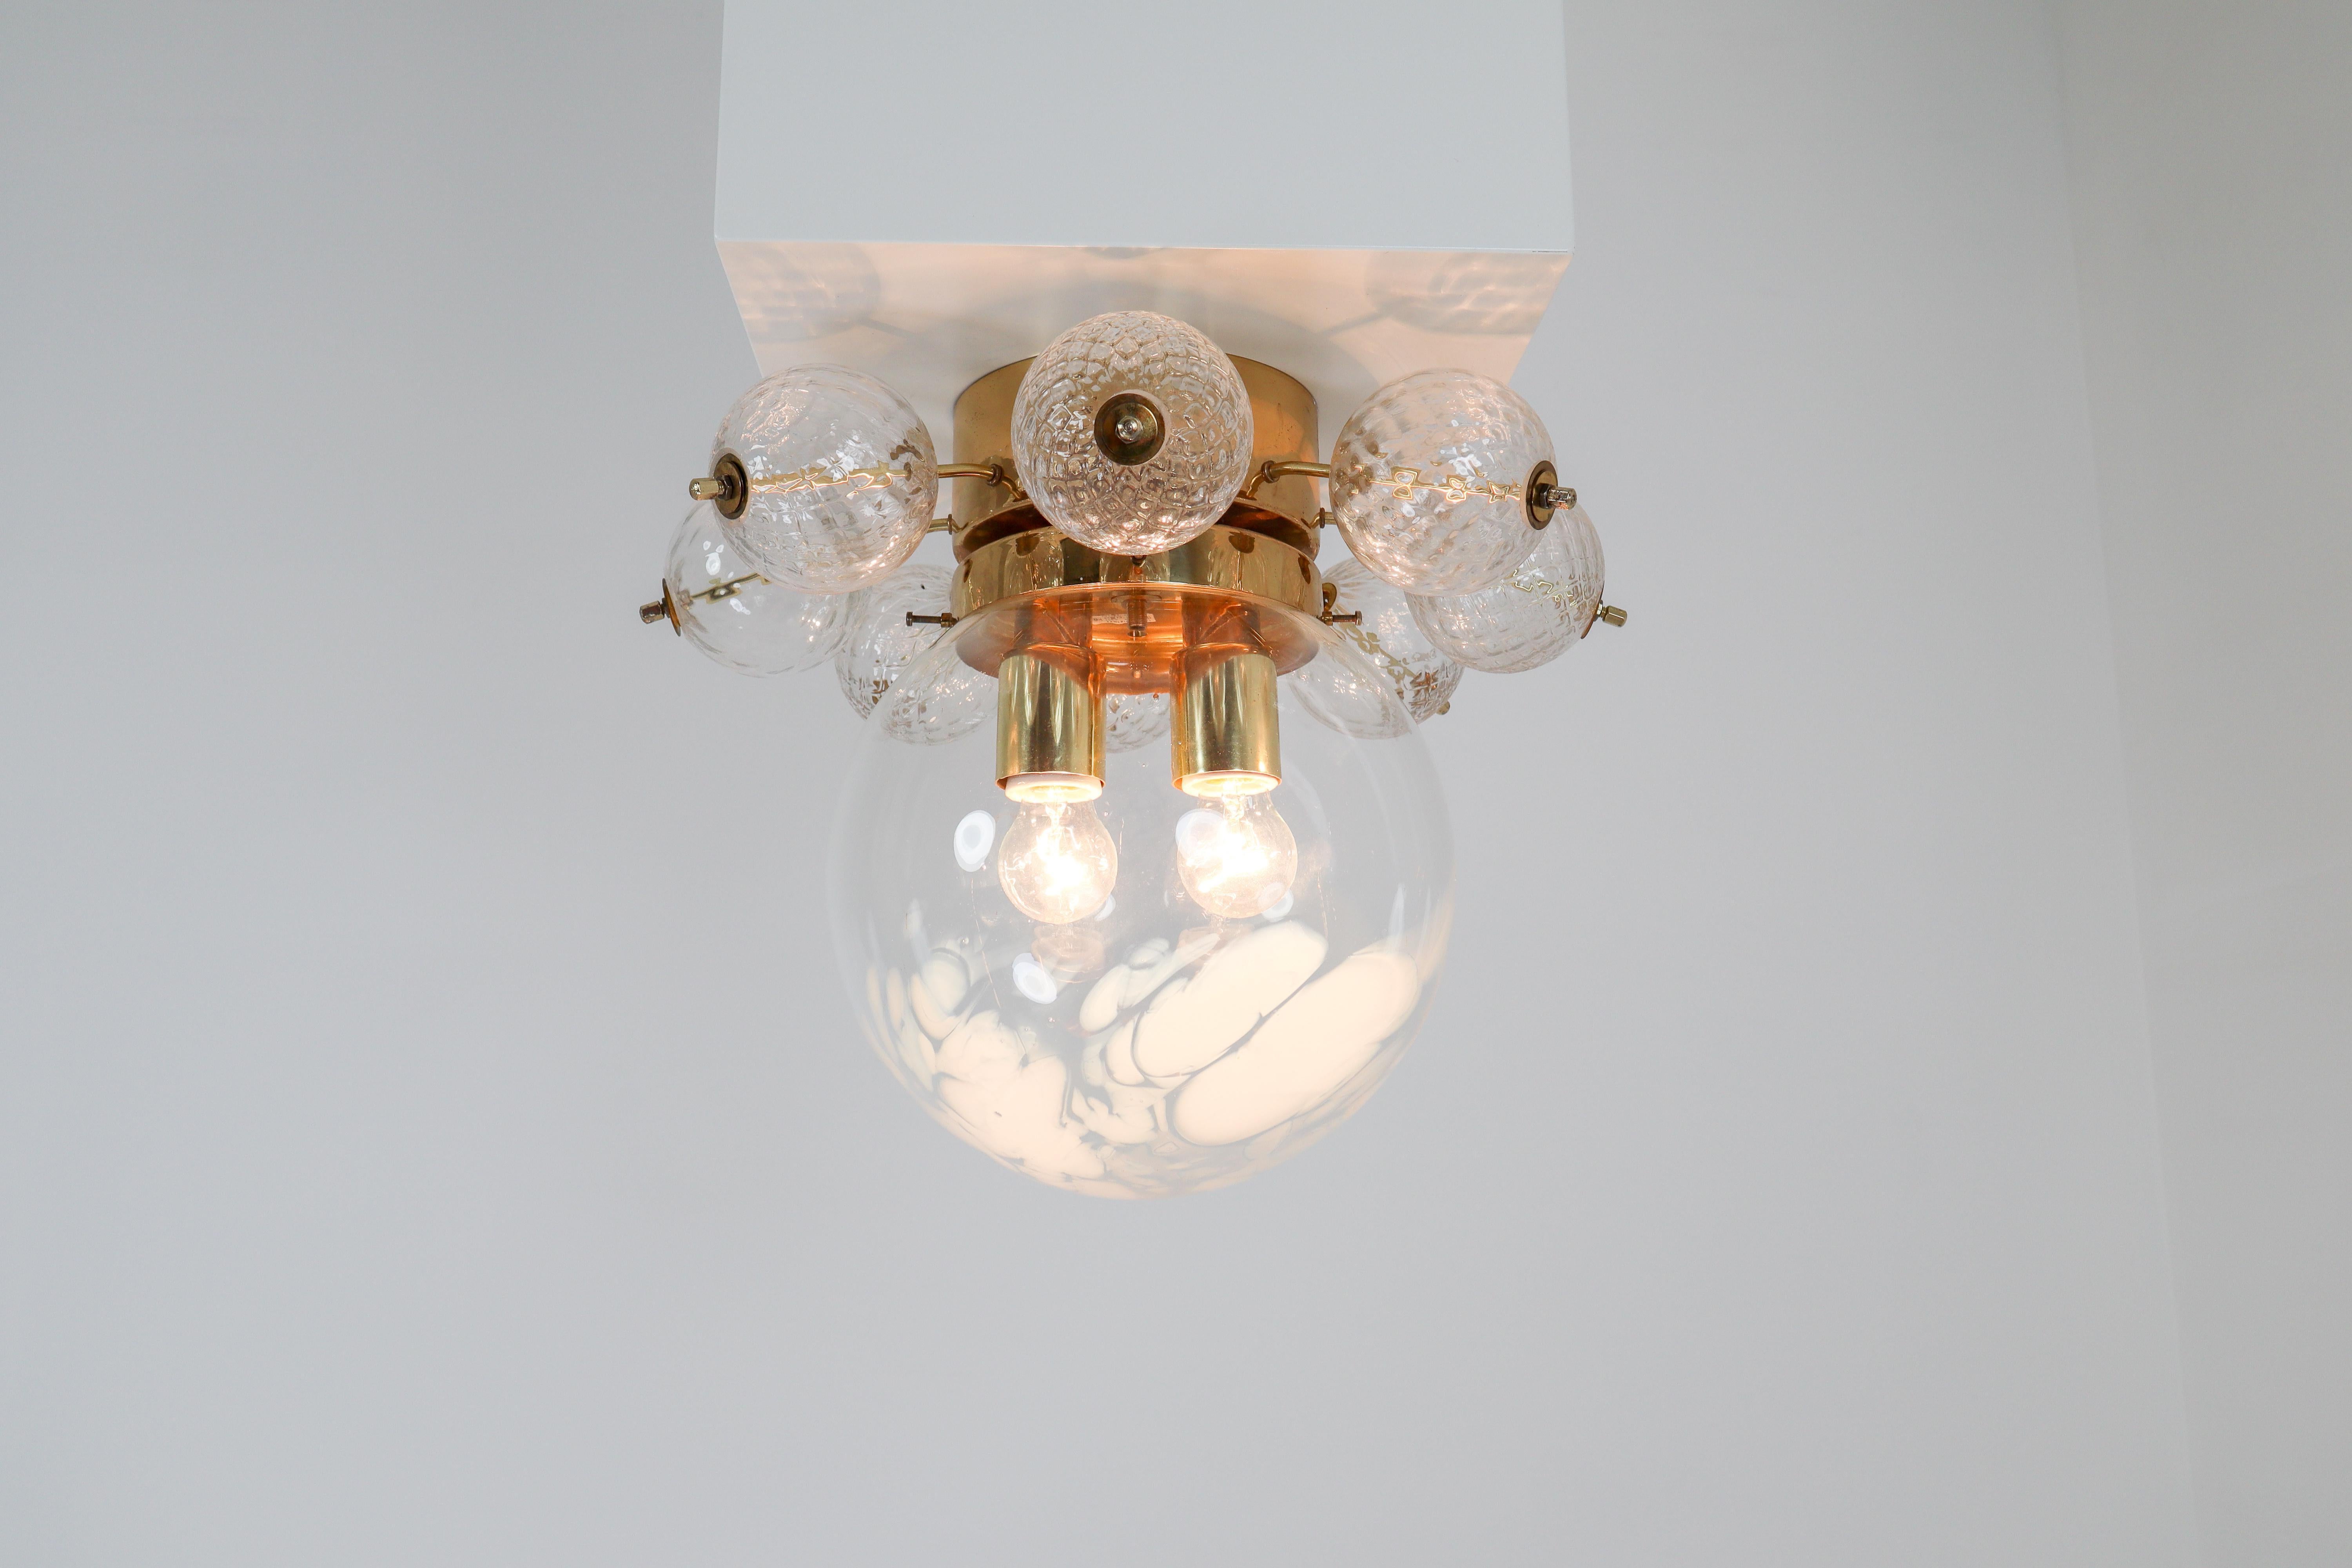 Large Midcentury Brass Ceiling Lamp-Chandelier with Handblown Art-Glass , 1960s In Good Condition For Sale In Almelo, NL